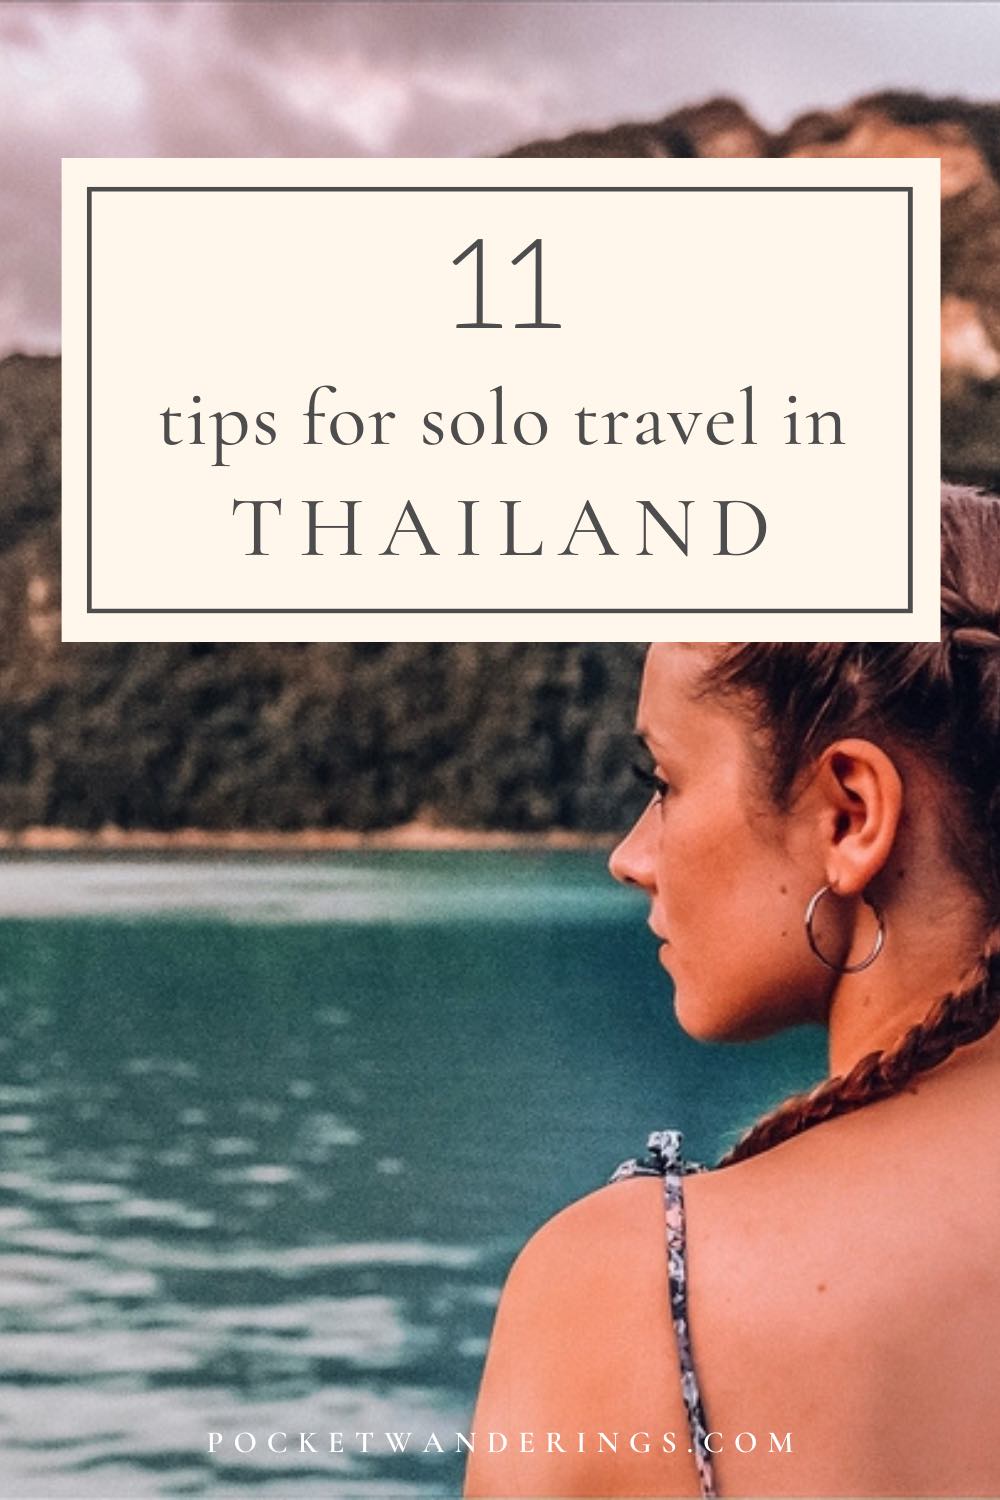 Tips for solo travel in Thailand